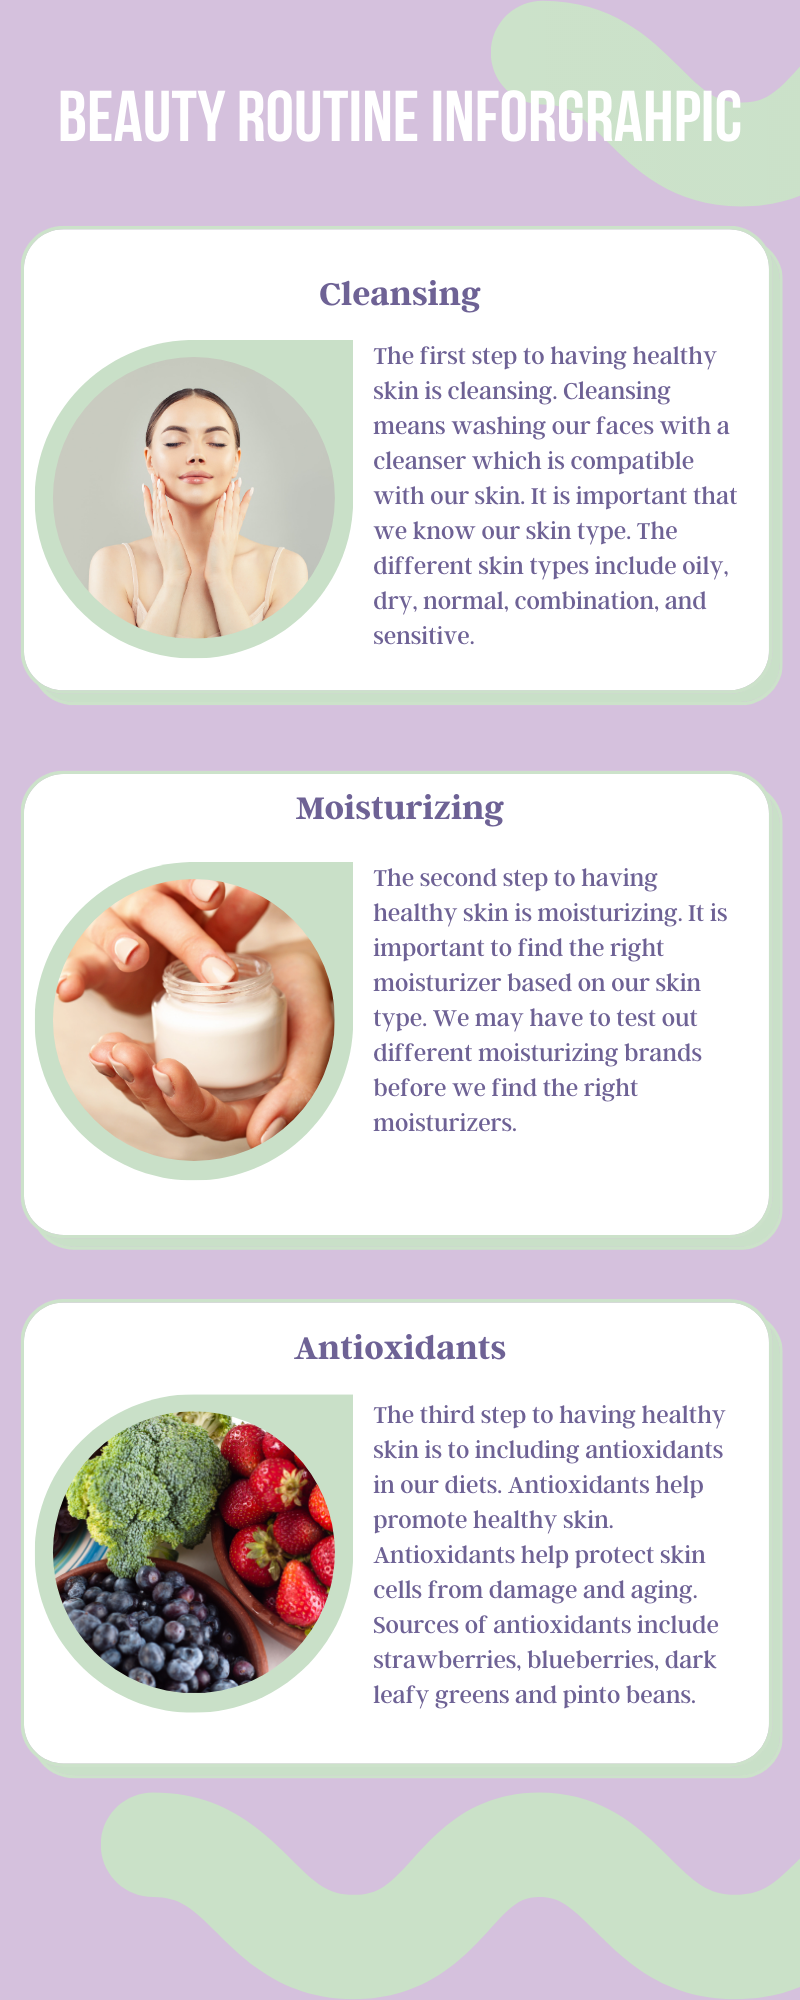 Beauty Routine Infographic